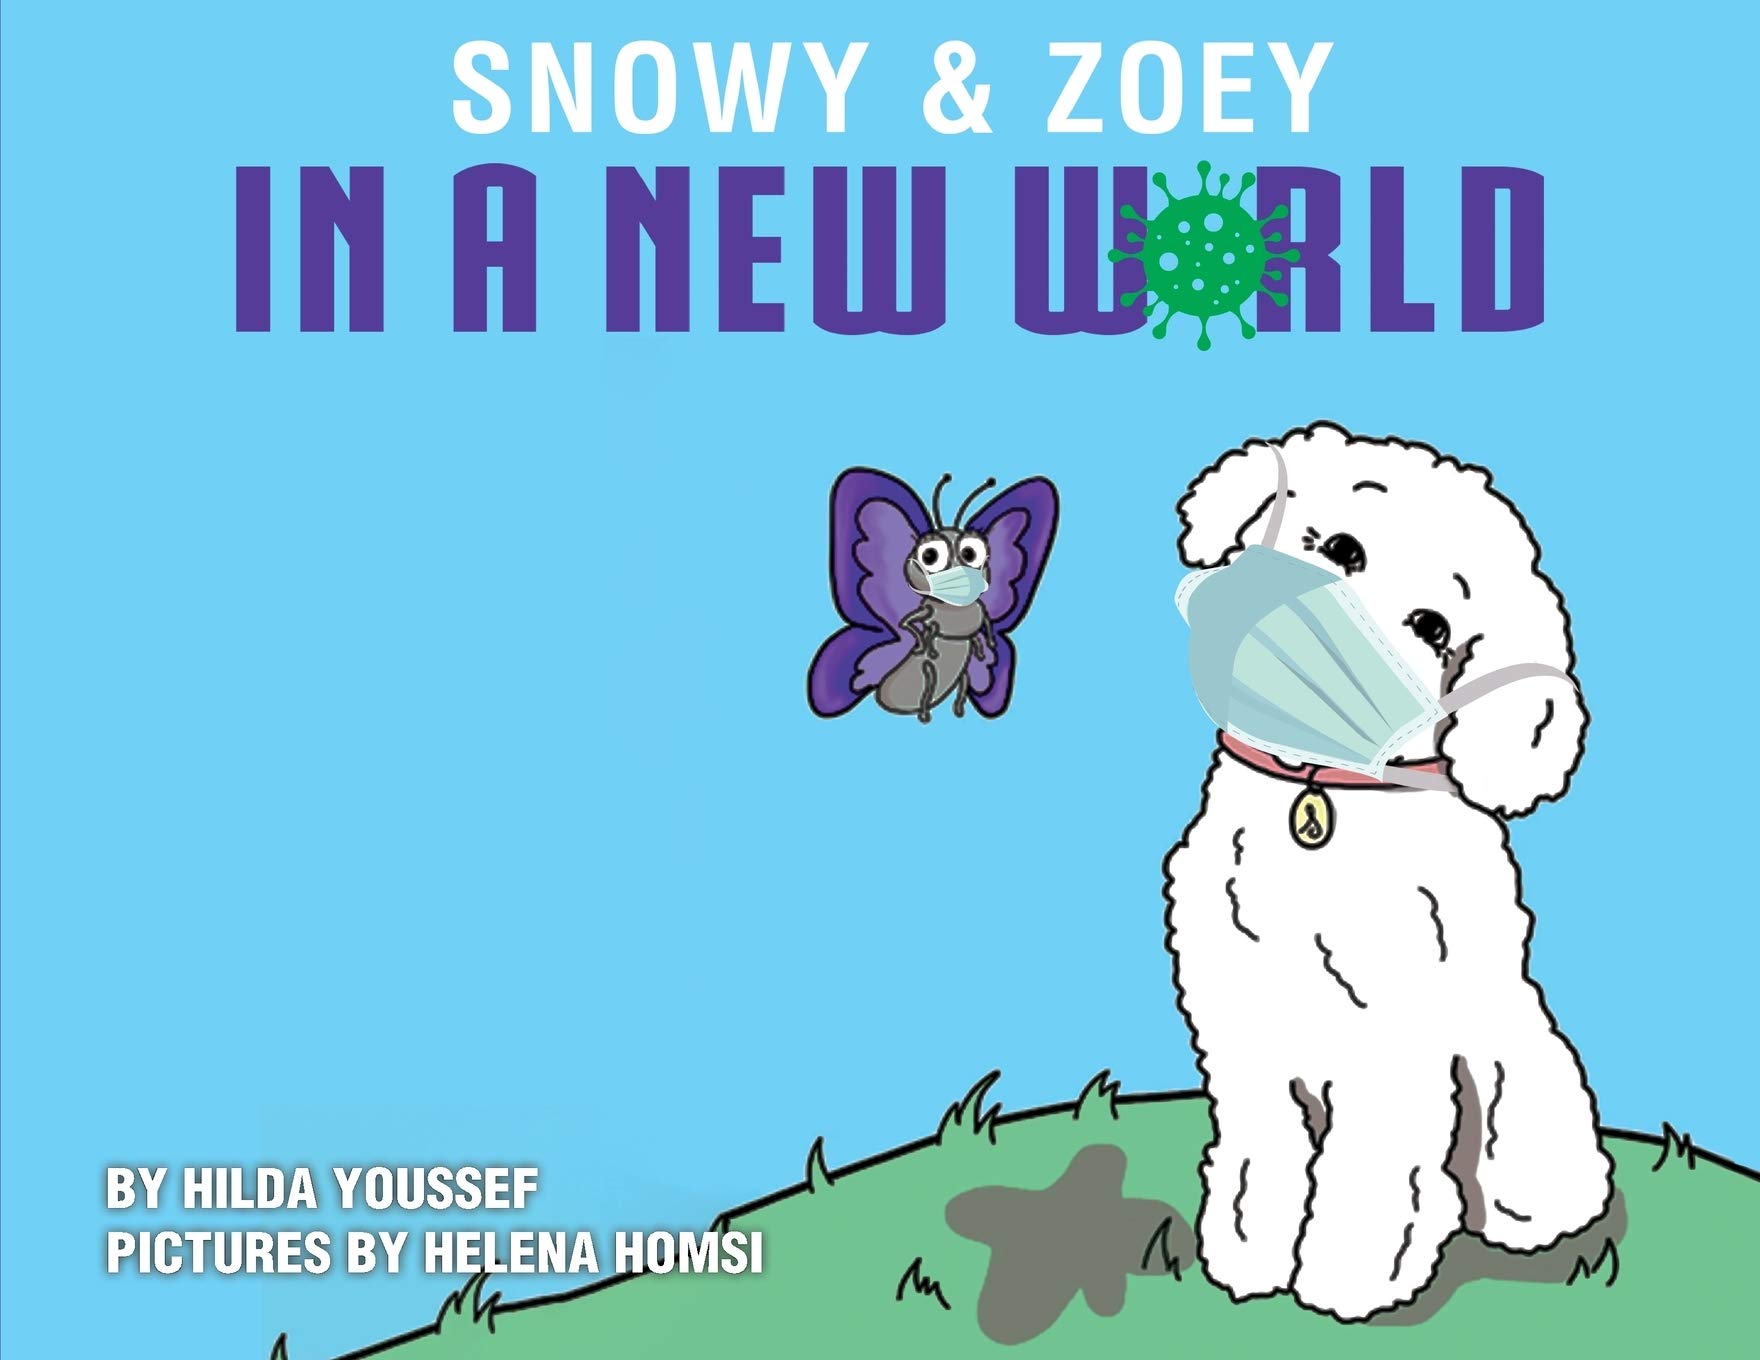 Making Learning Fun With the Adventures of Snowy & Zoey